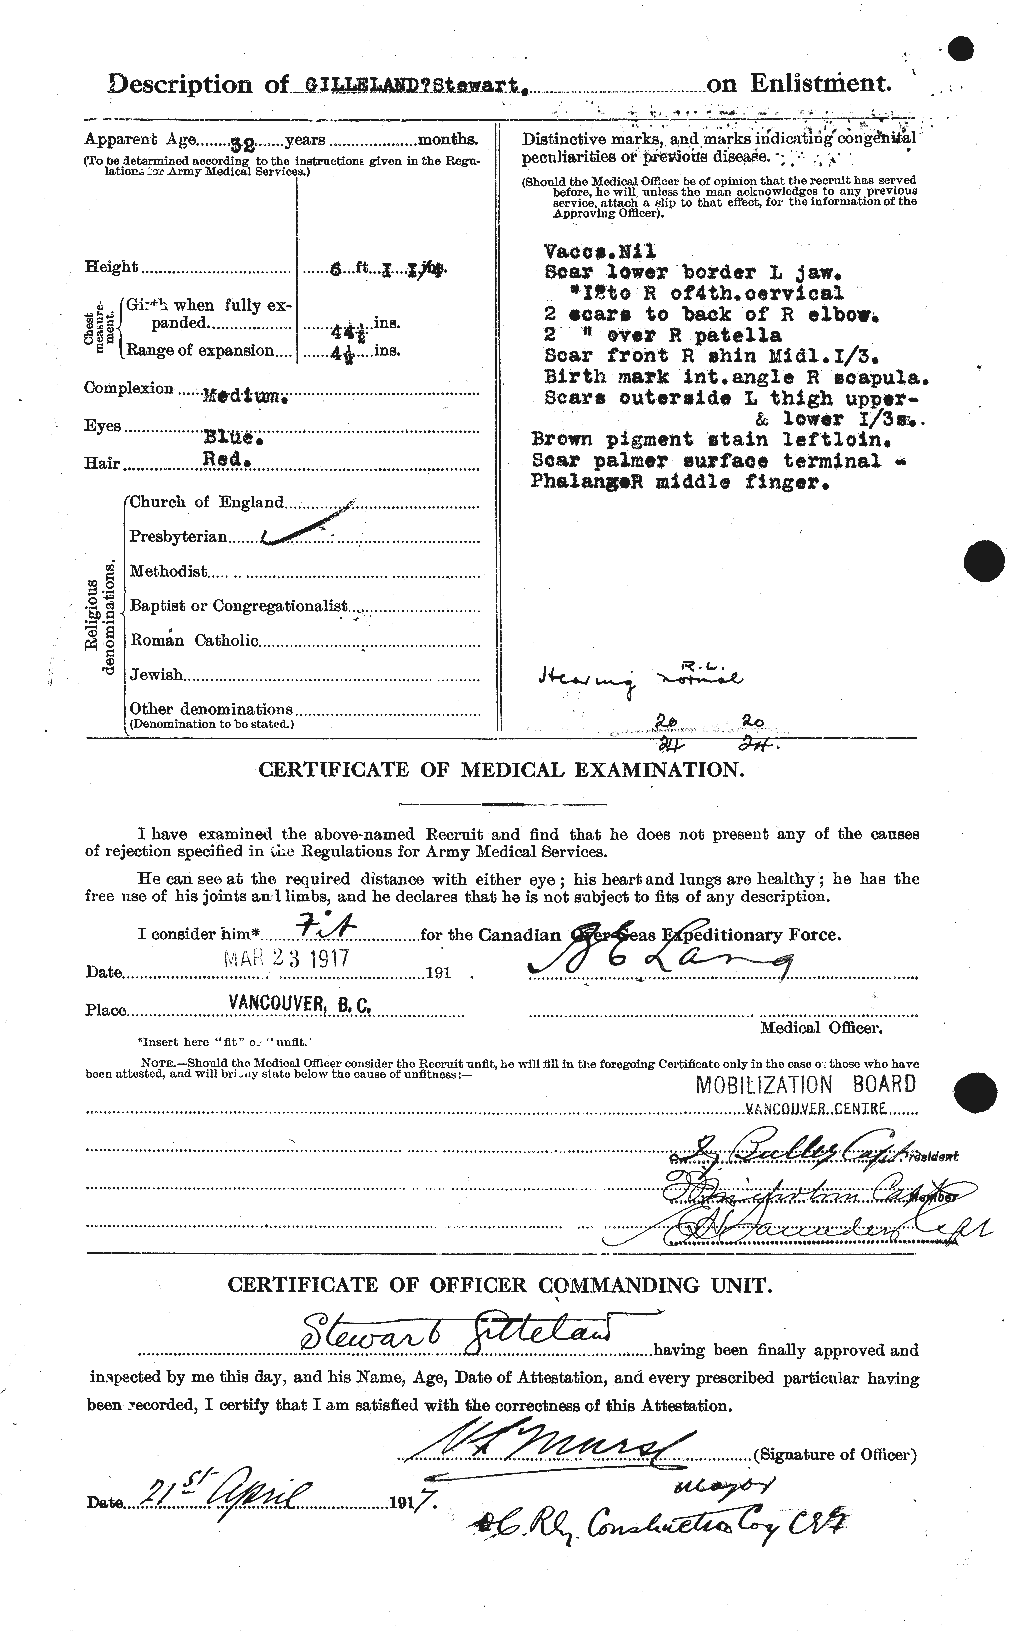 Personnel Records of the First World War - CEF 347833b